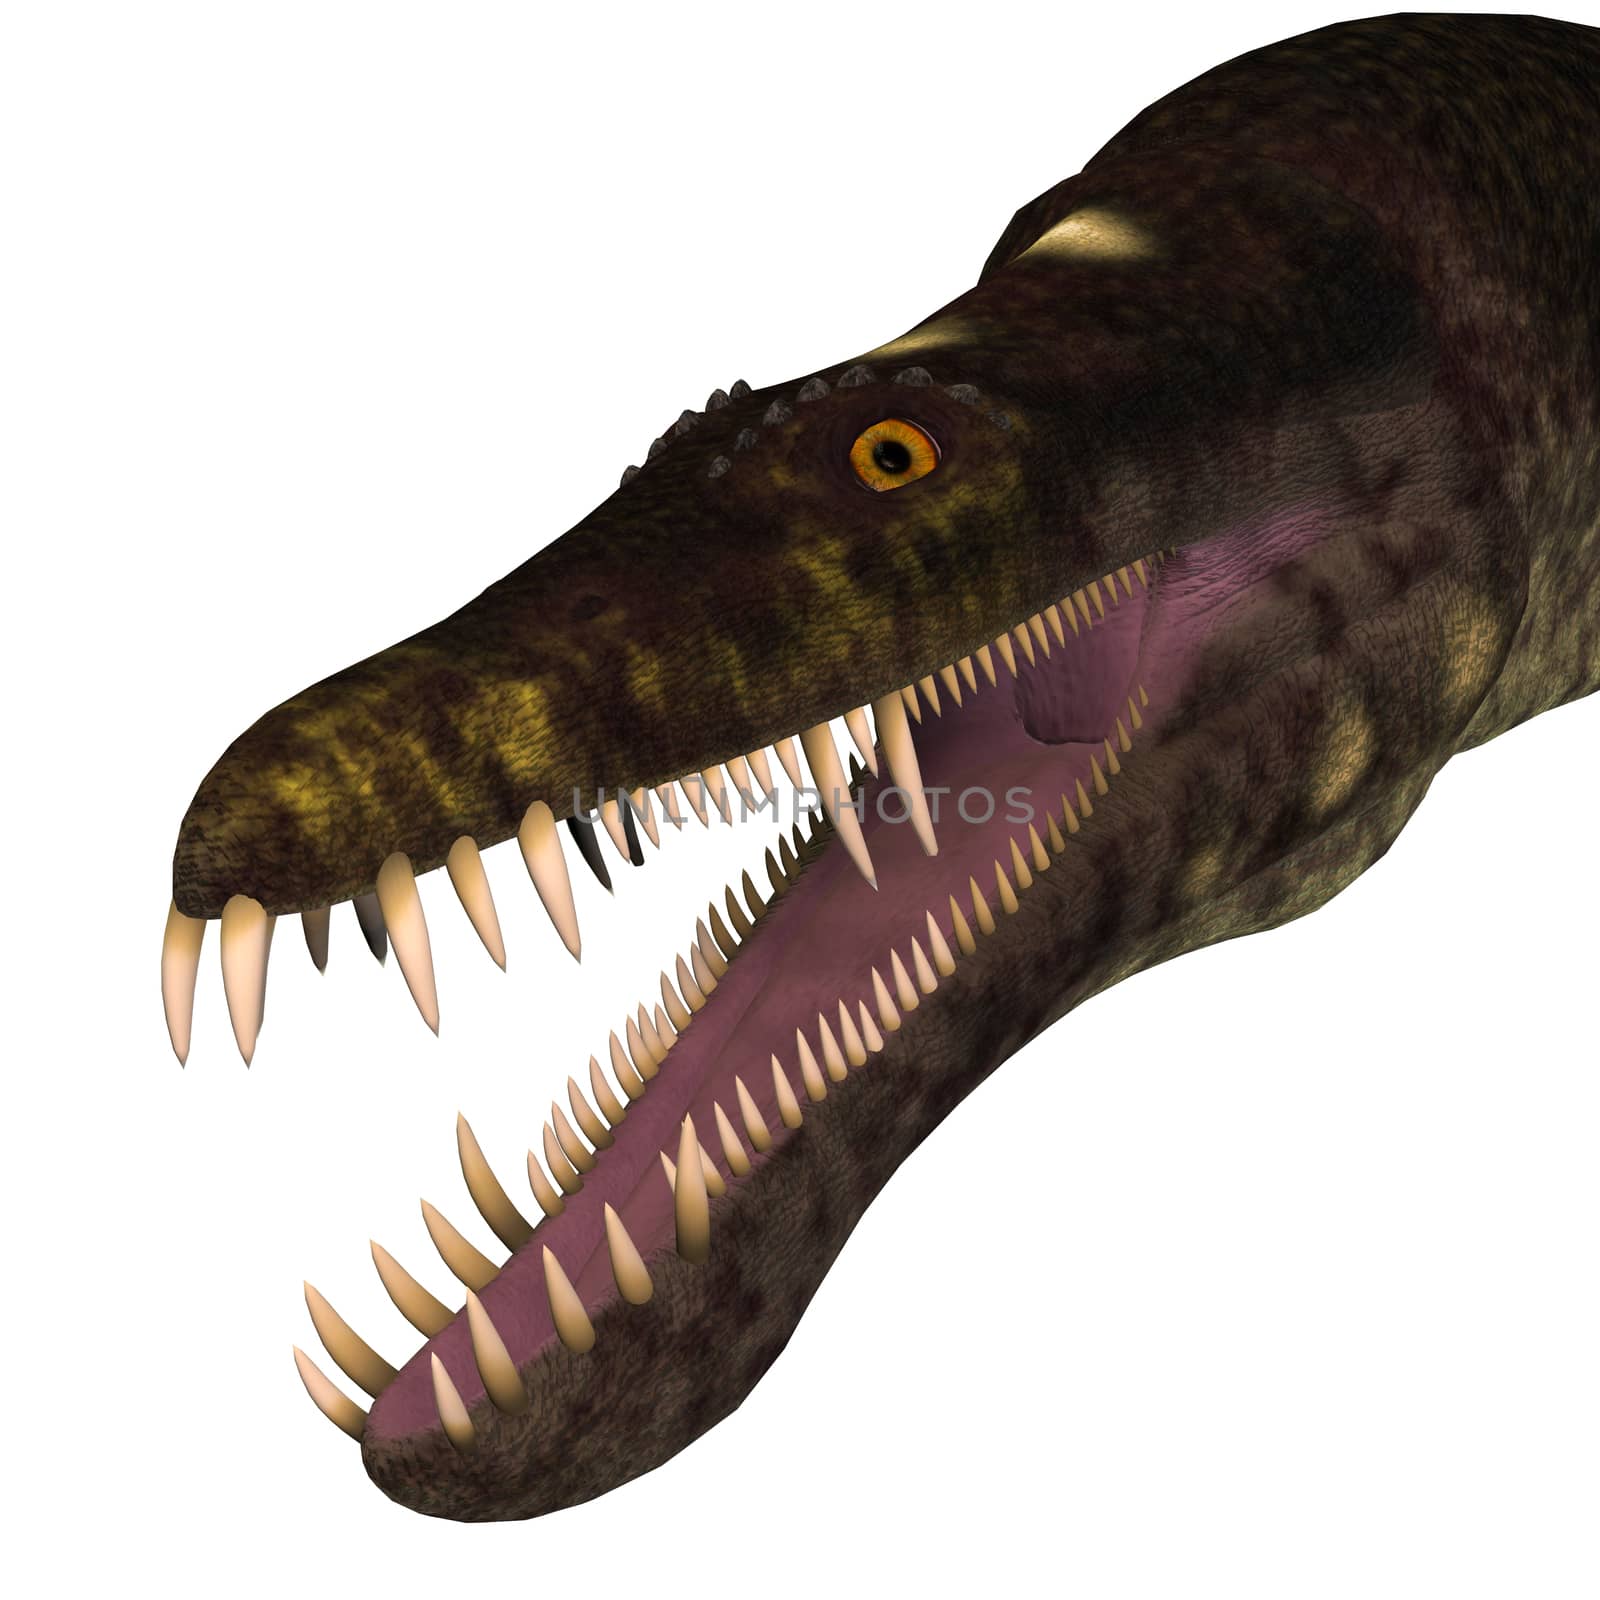 Nothosaurus was a semi-aquatic carnivorous reptile that lived in the Triassic Period of North Africa, Europe and China.